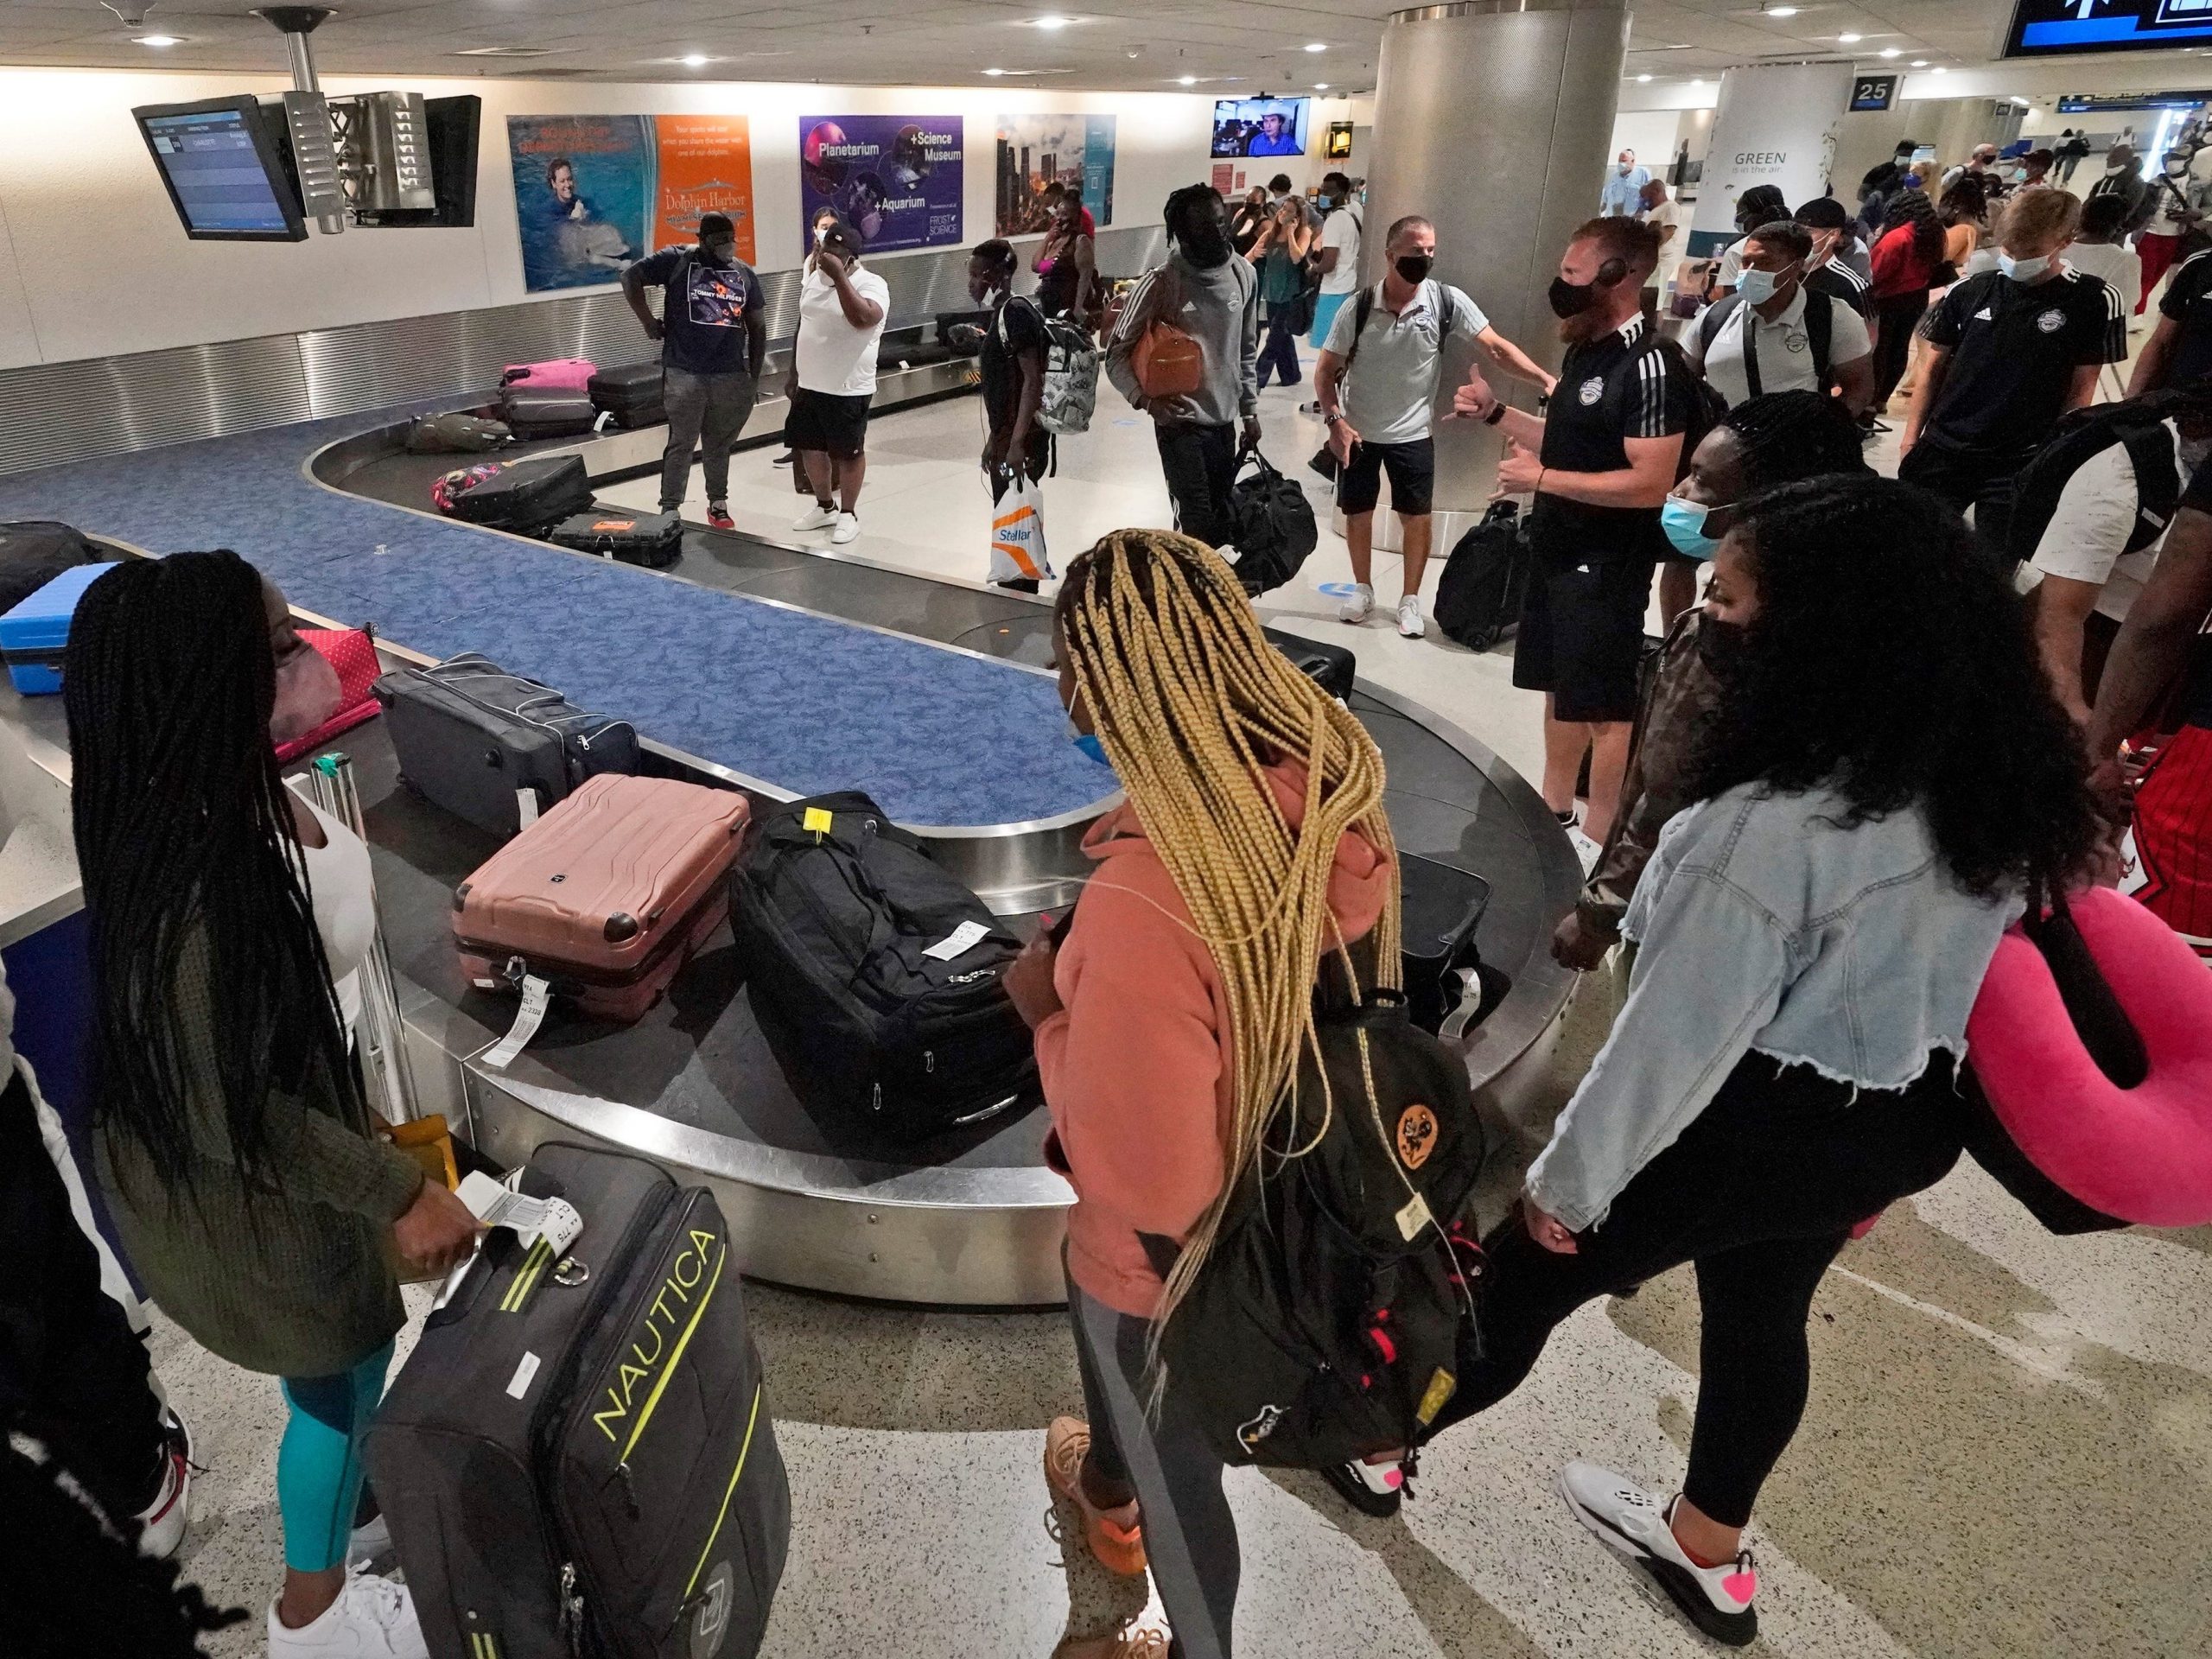 Travelers wait for their luggage at a baggage carousel, Friday, May 28, 2021, at Miami International Airport in Miami.